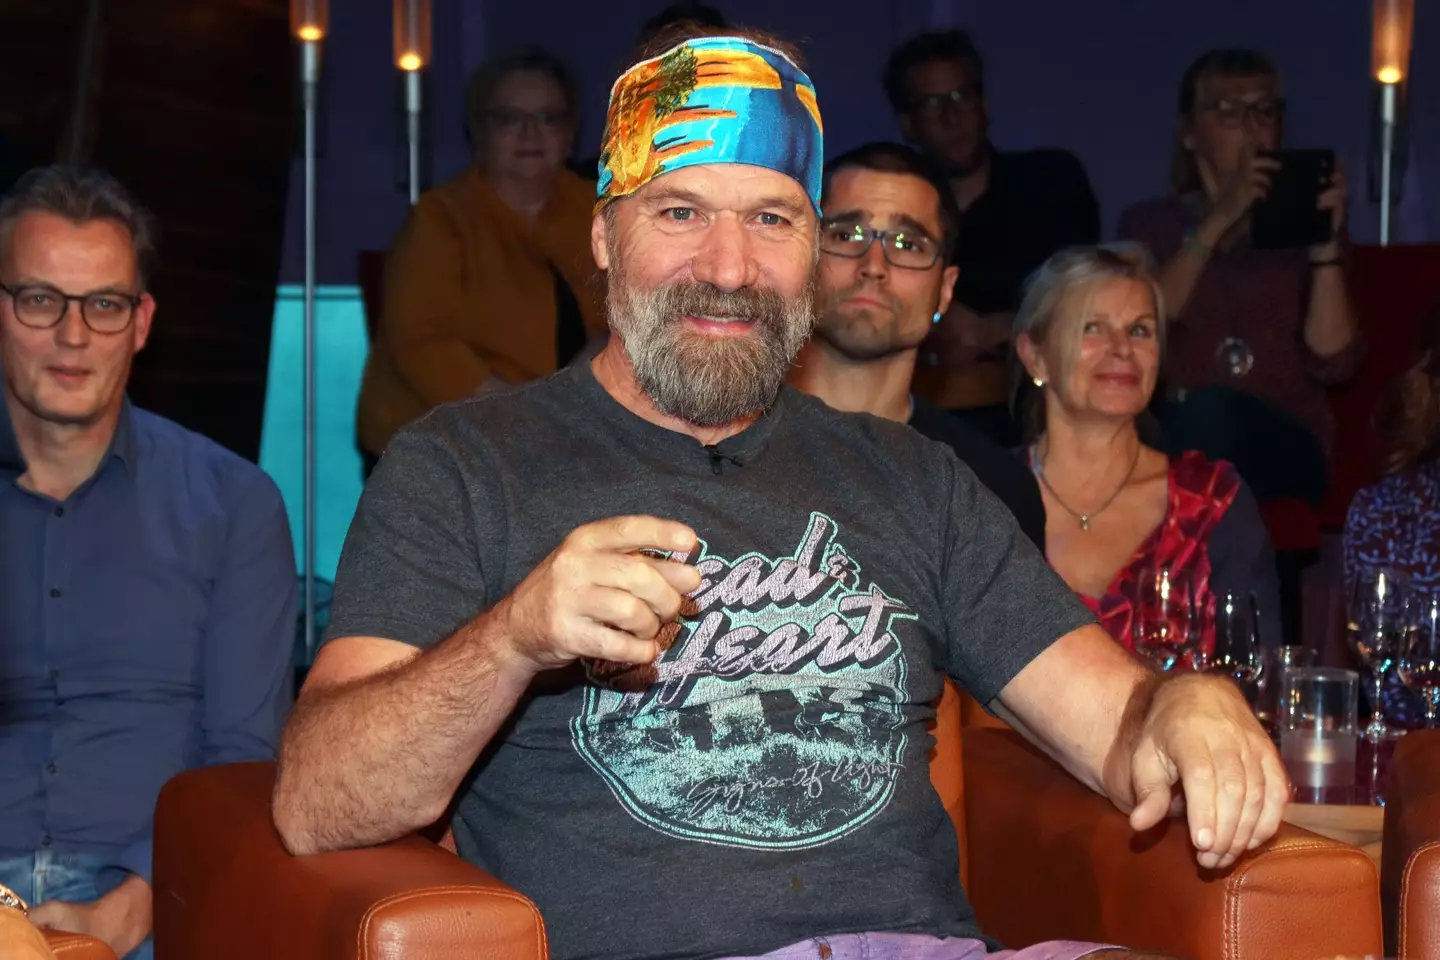 Wim Hof is the Iceman and has been able to survive at incredibly cold temperatures.